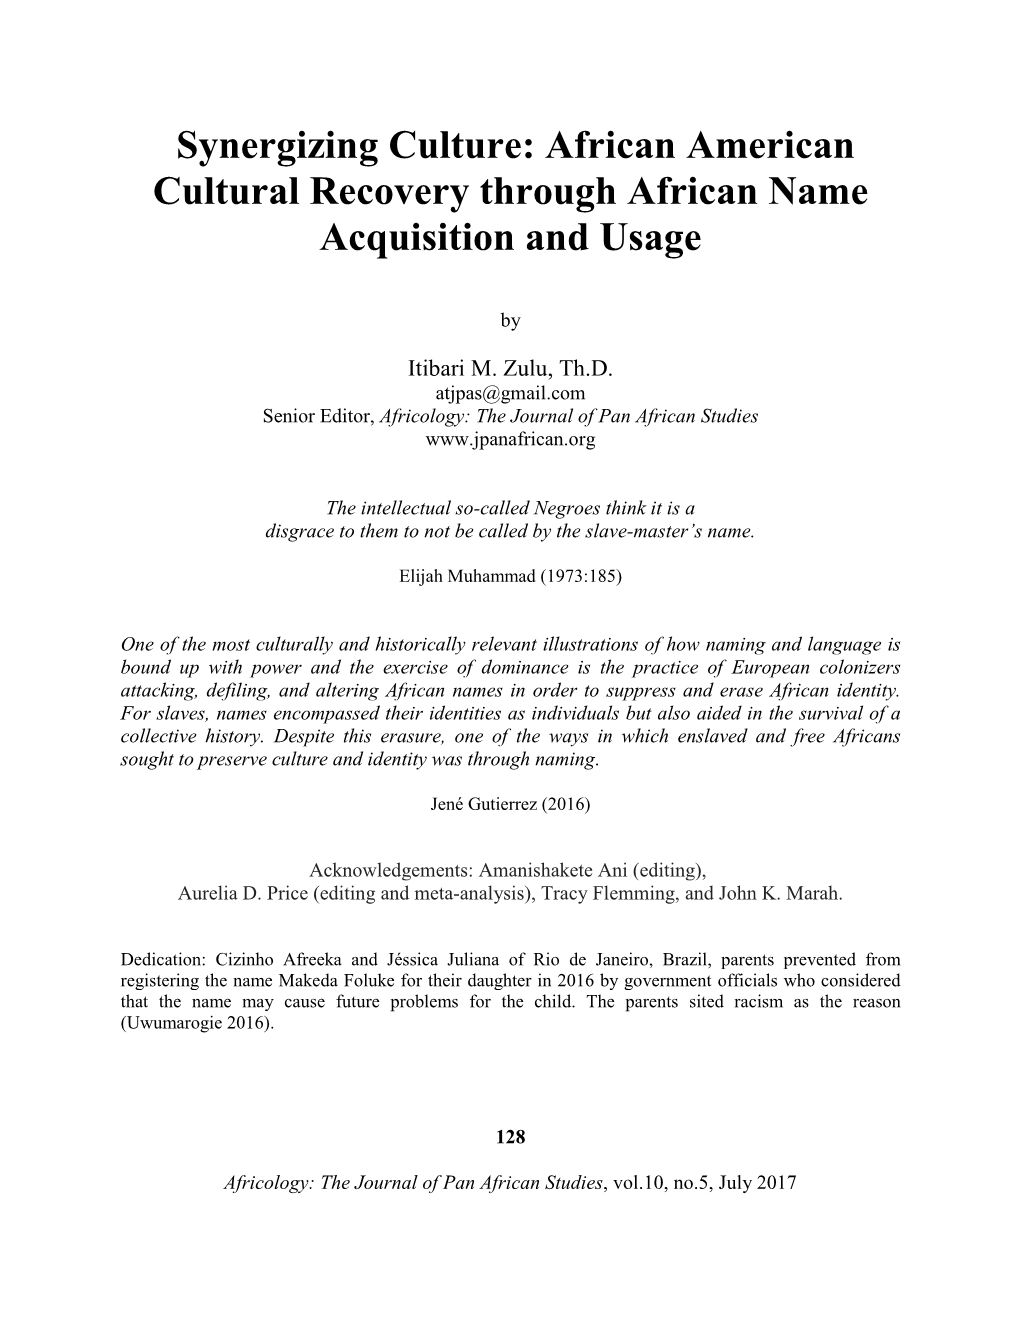 African American Cultural Recovery Through African Name Acquisition and Usage